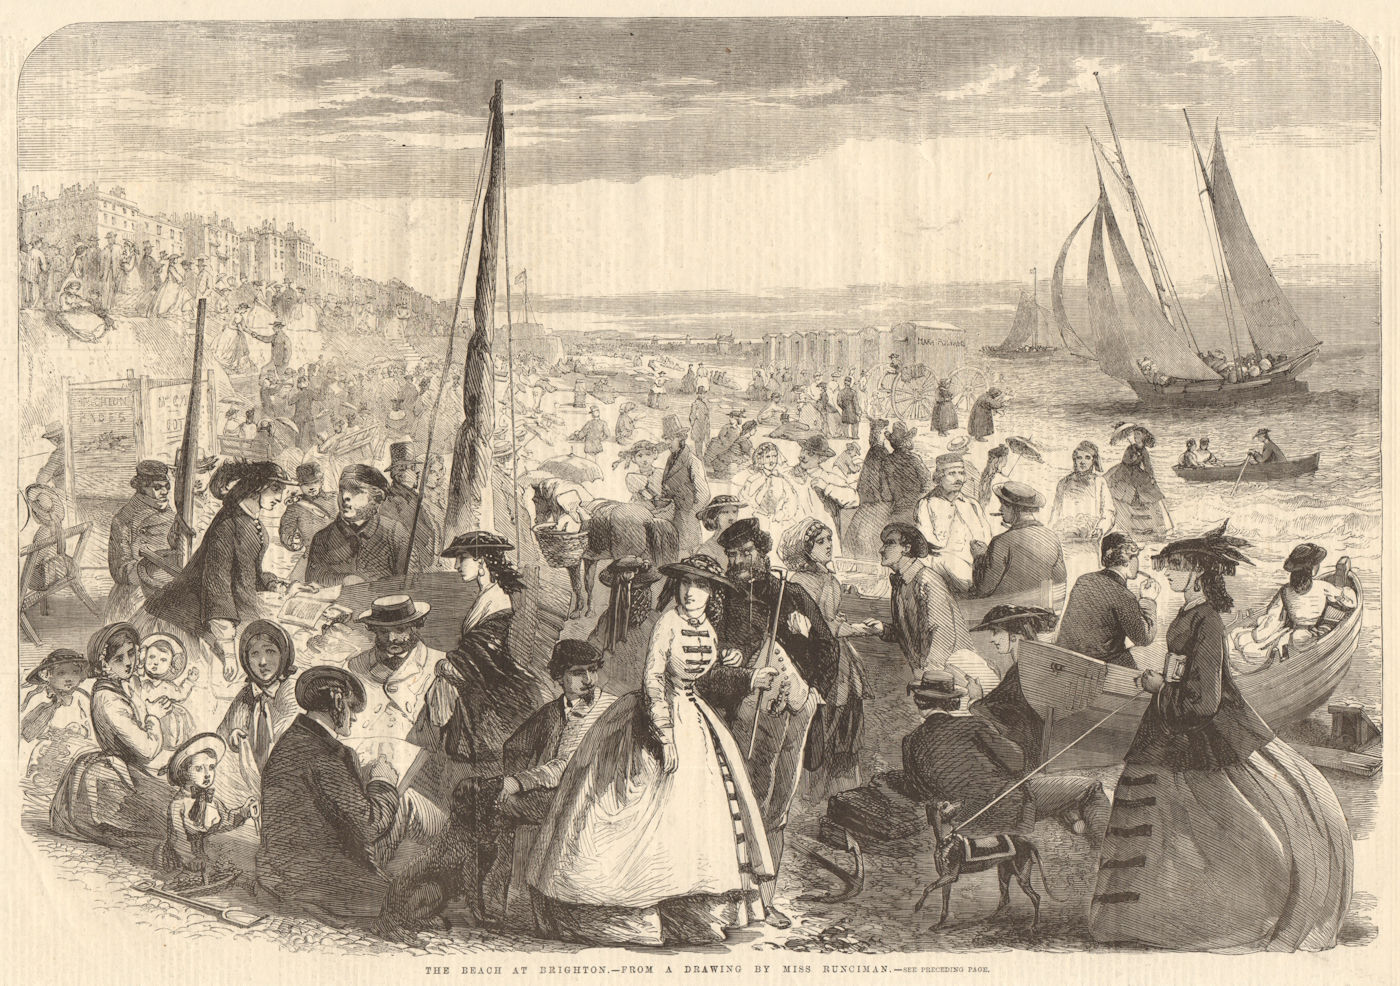 The beach at Brighton - from a drawing by Miss Runciman. Sussex. Society 1859